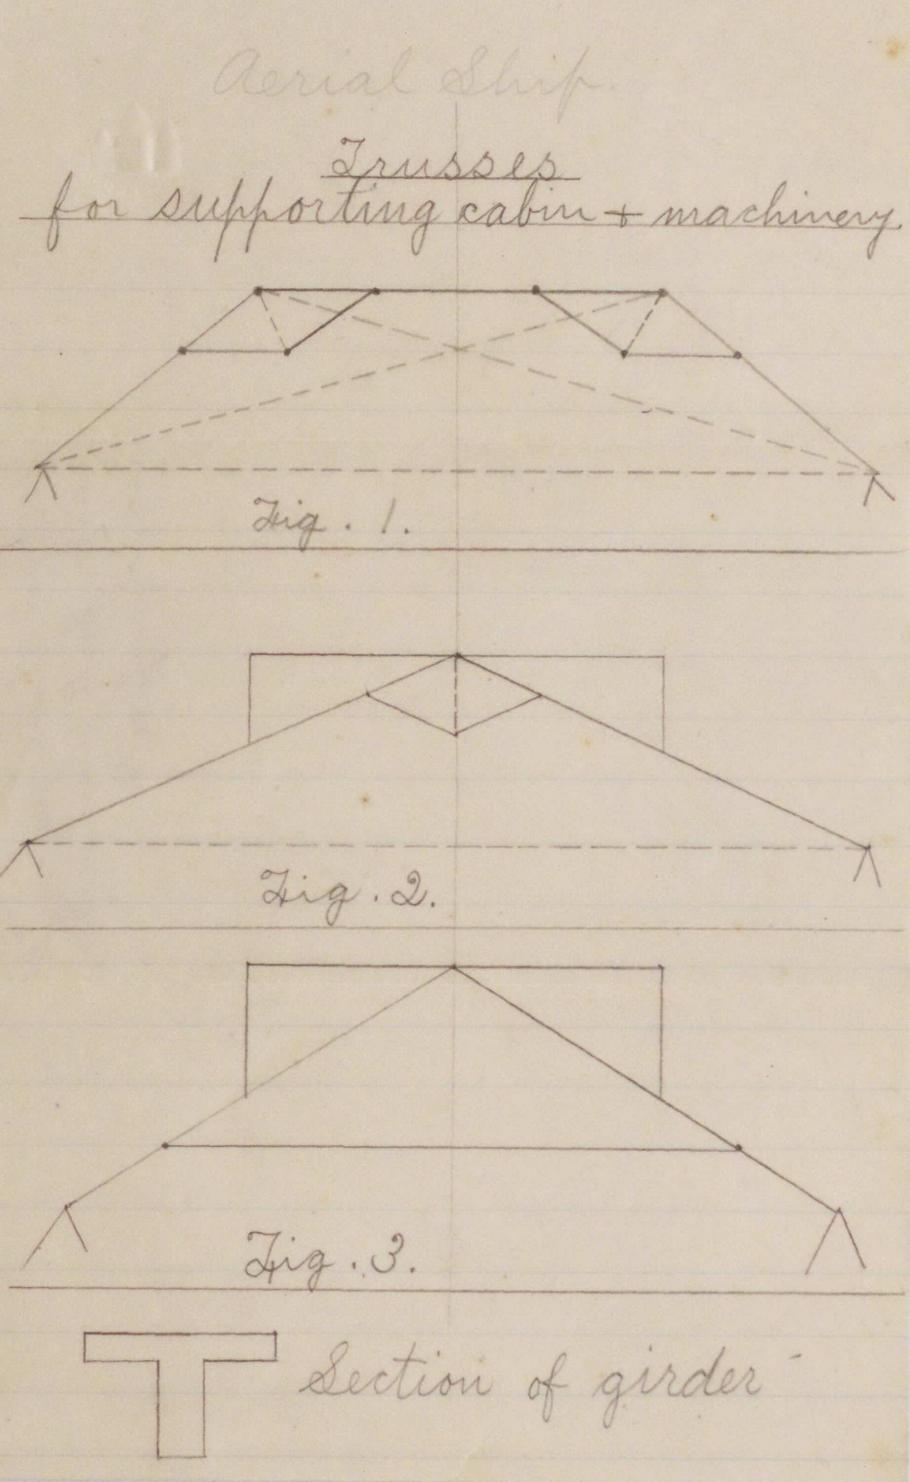 Cursive Text: Aerial Ship, Trusses Support Cabinet and Machinery, three; letter T shape labelled section of girder line drawings labeled Fig. 1, 2, 3, 